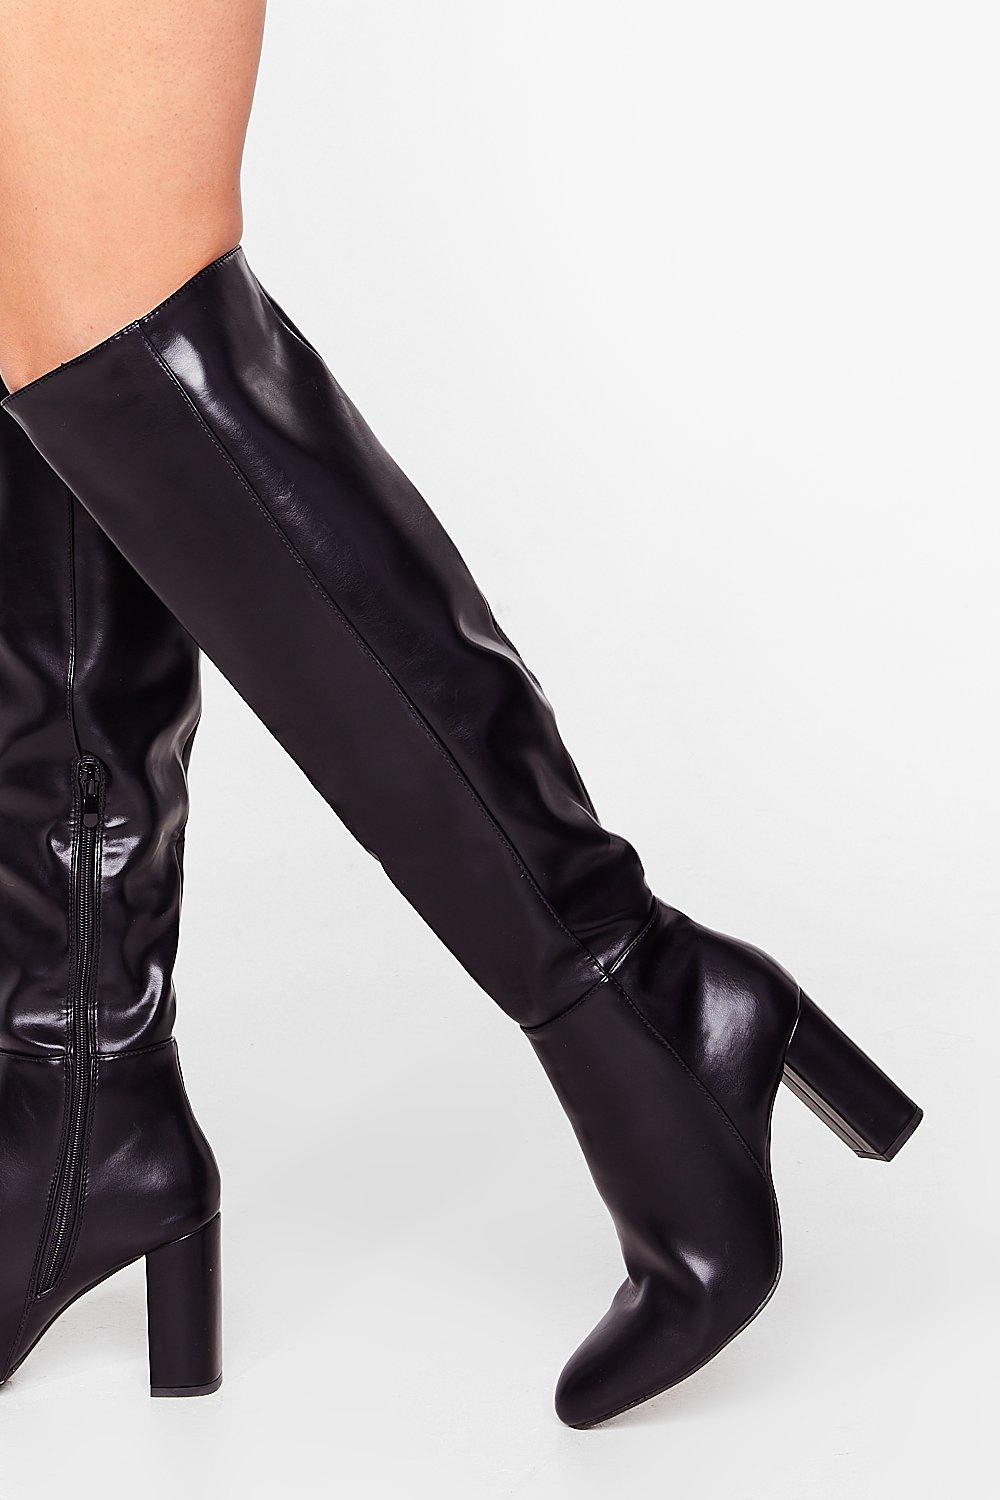 faux leather pants and thigh high boots?? this can only mean one thing (;  #2021